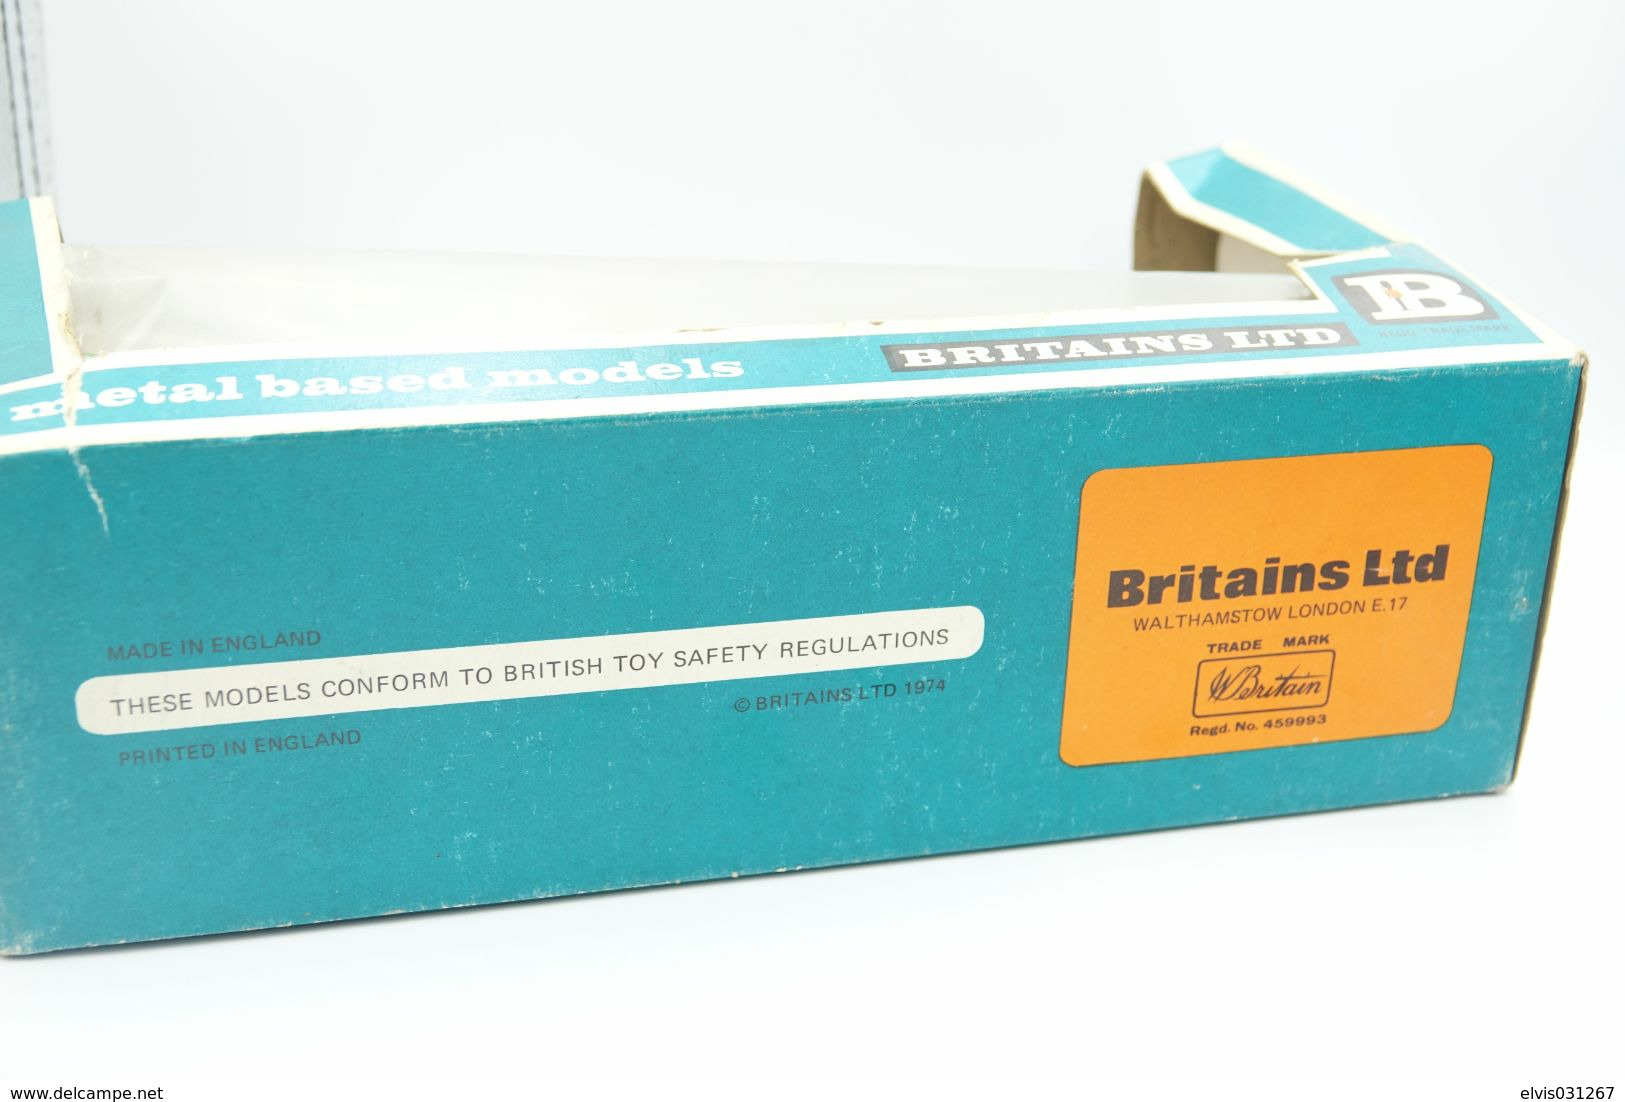 Britains Ltd, Deetail : BATTLE OF WATERLOO Original IN BOX N°7945, Made In England, RARE COLLECTOR - Britains